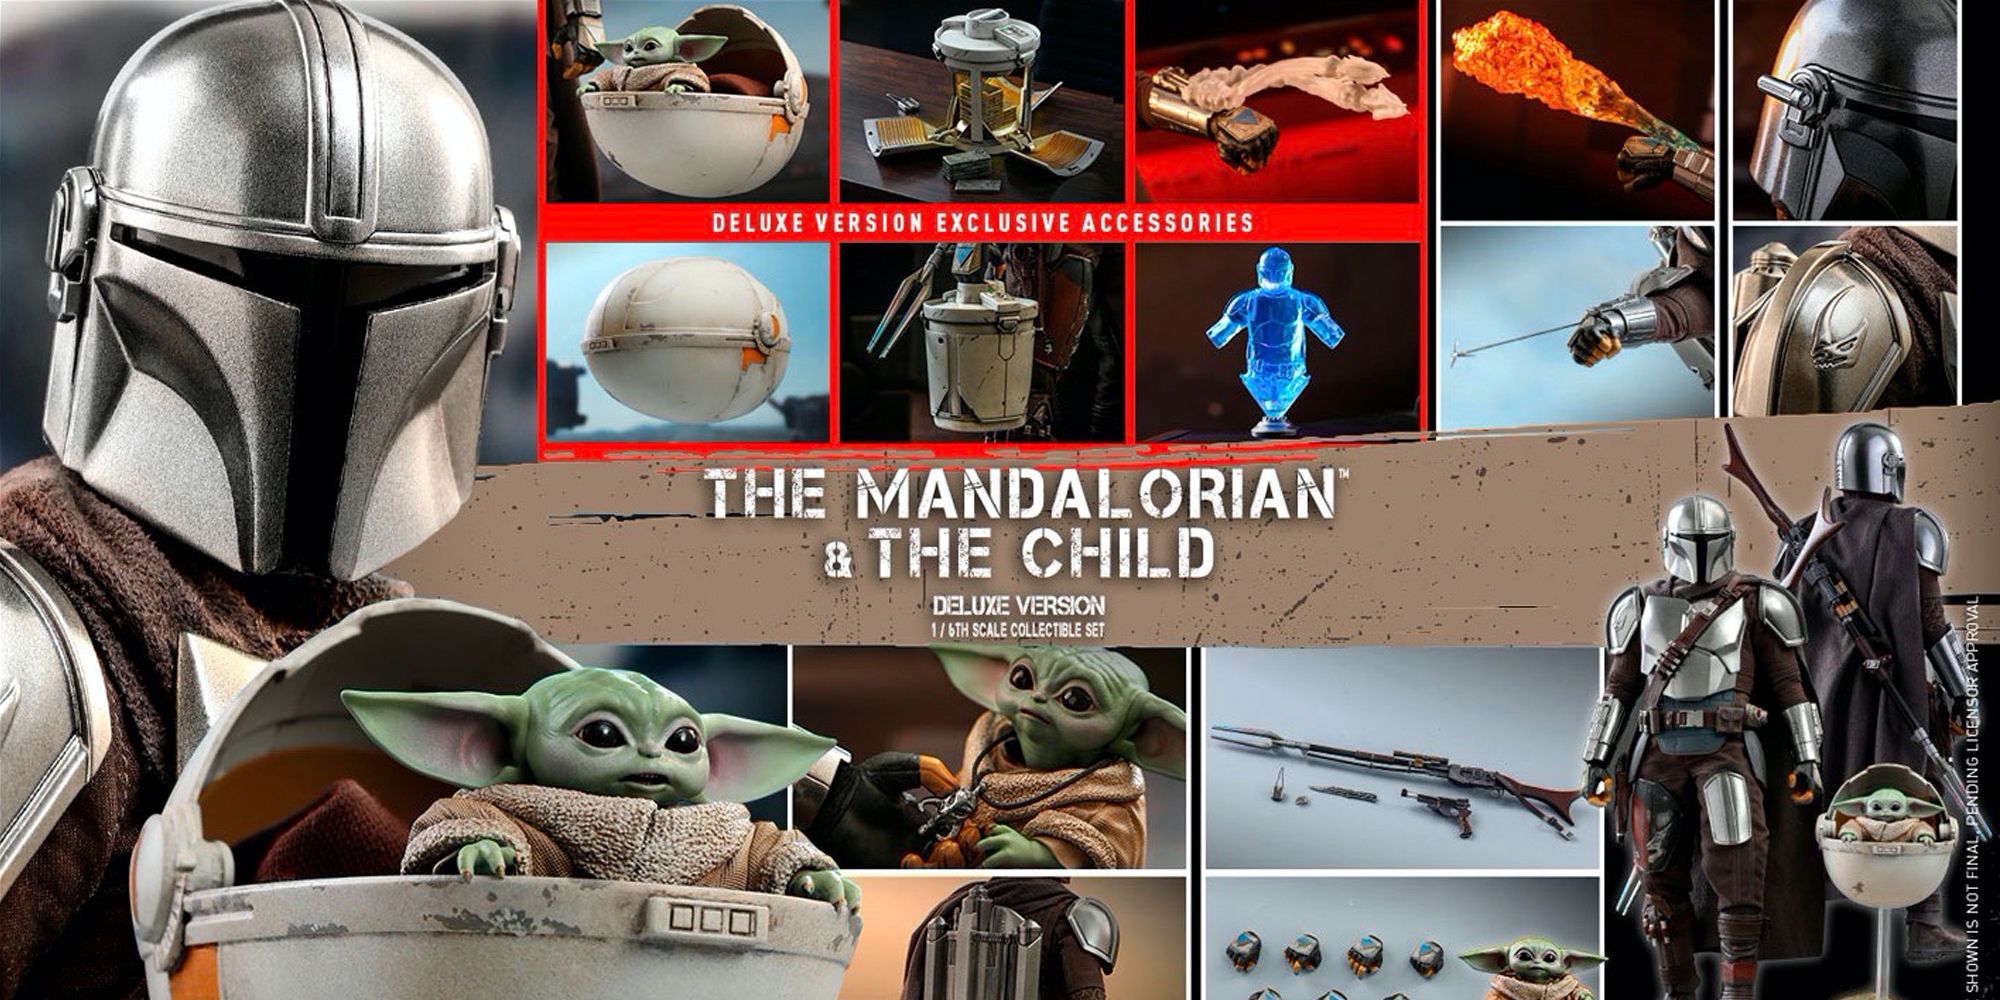 The Mandalorian and Baby Ypda Deluxe Edition